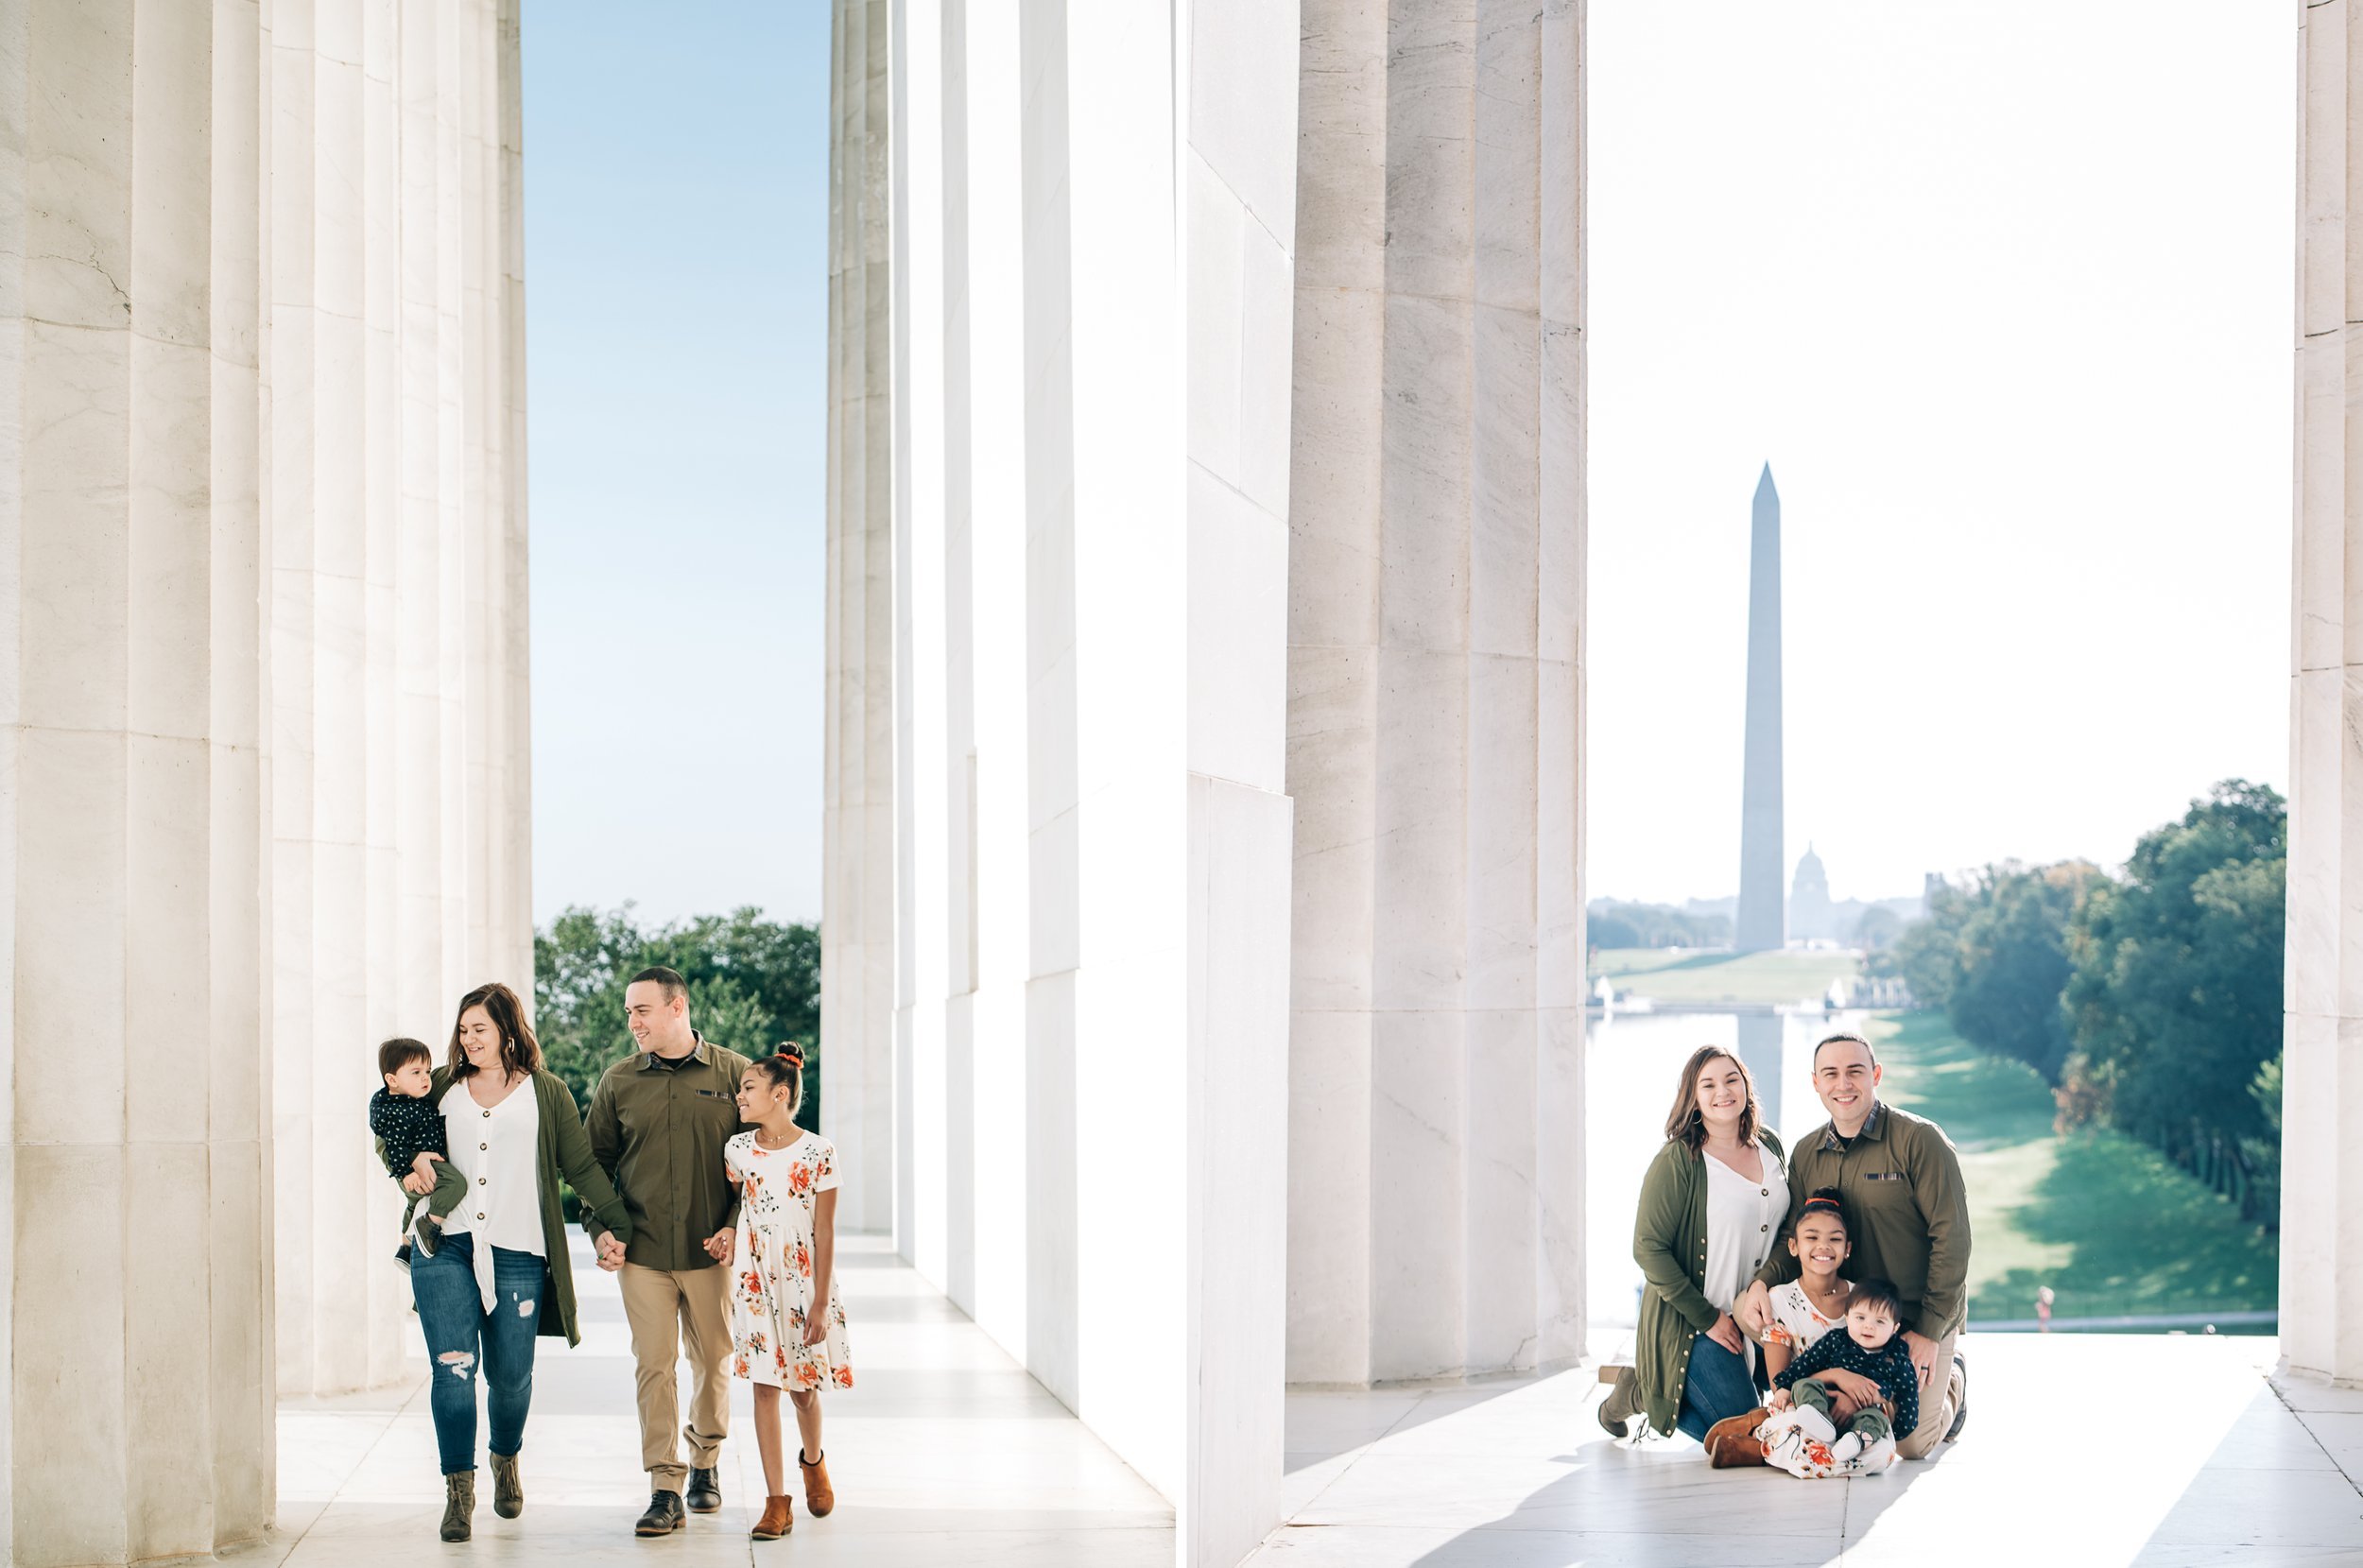 Sunrise Family Session at Lincoln Memorial